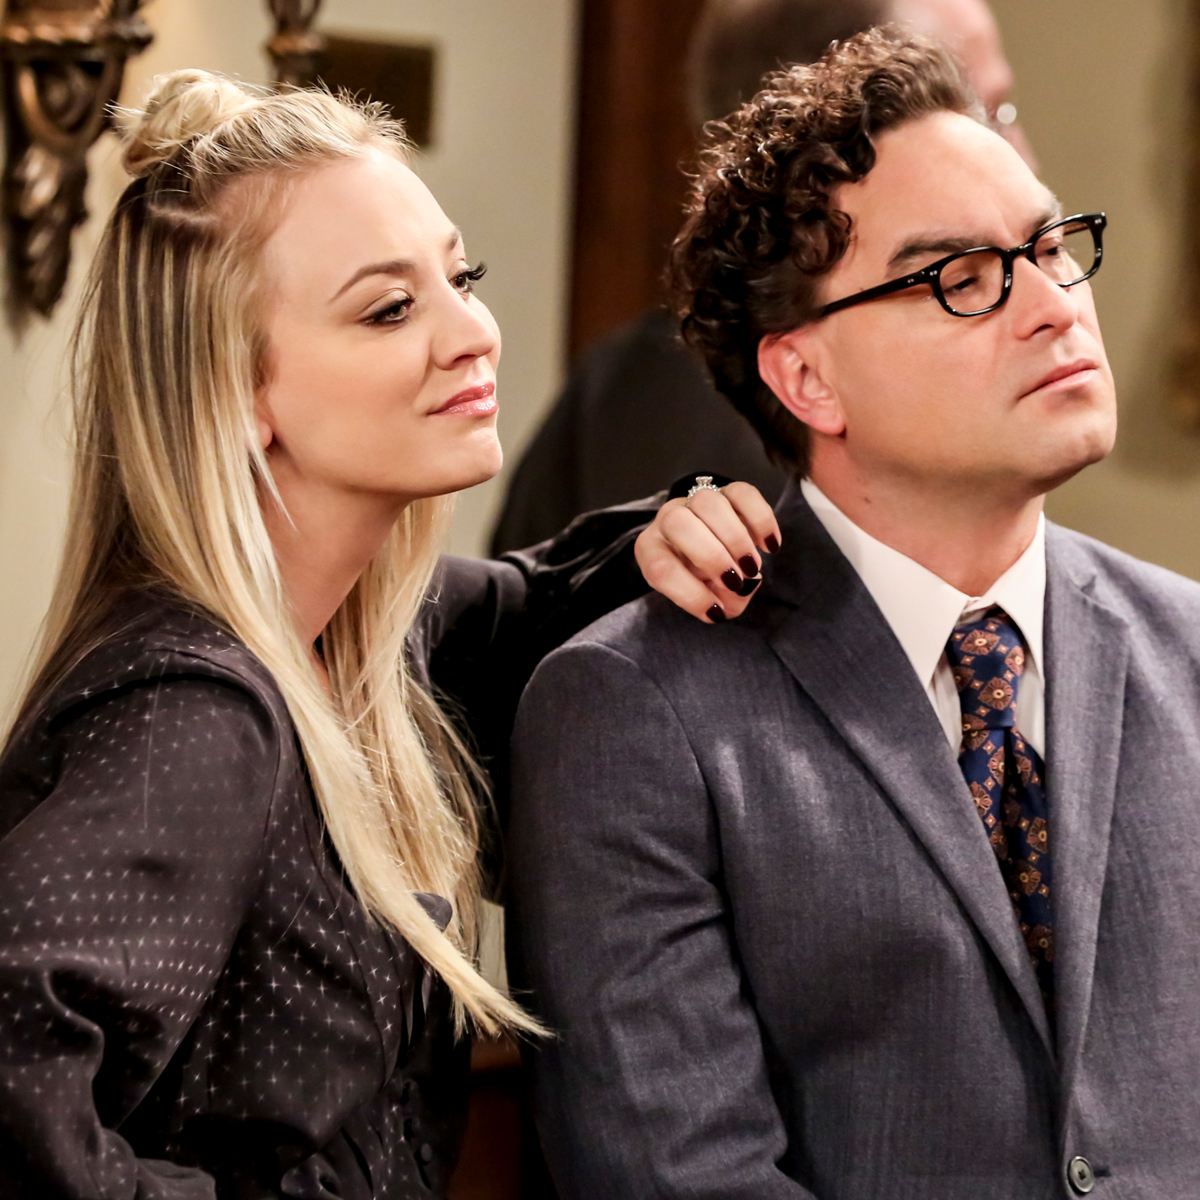 Johnny Galecki And Kaley Cuoco Sex Tape - Johnny Galecki News, Pictures, and Videos - E! Online - CA